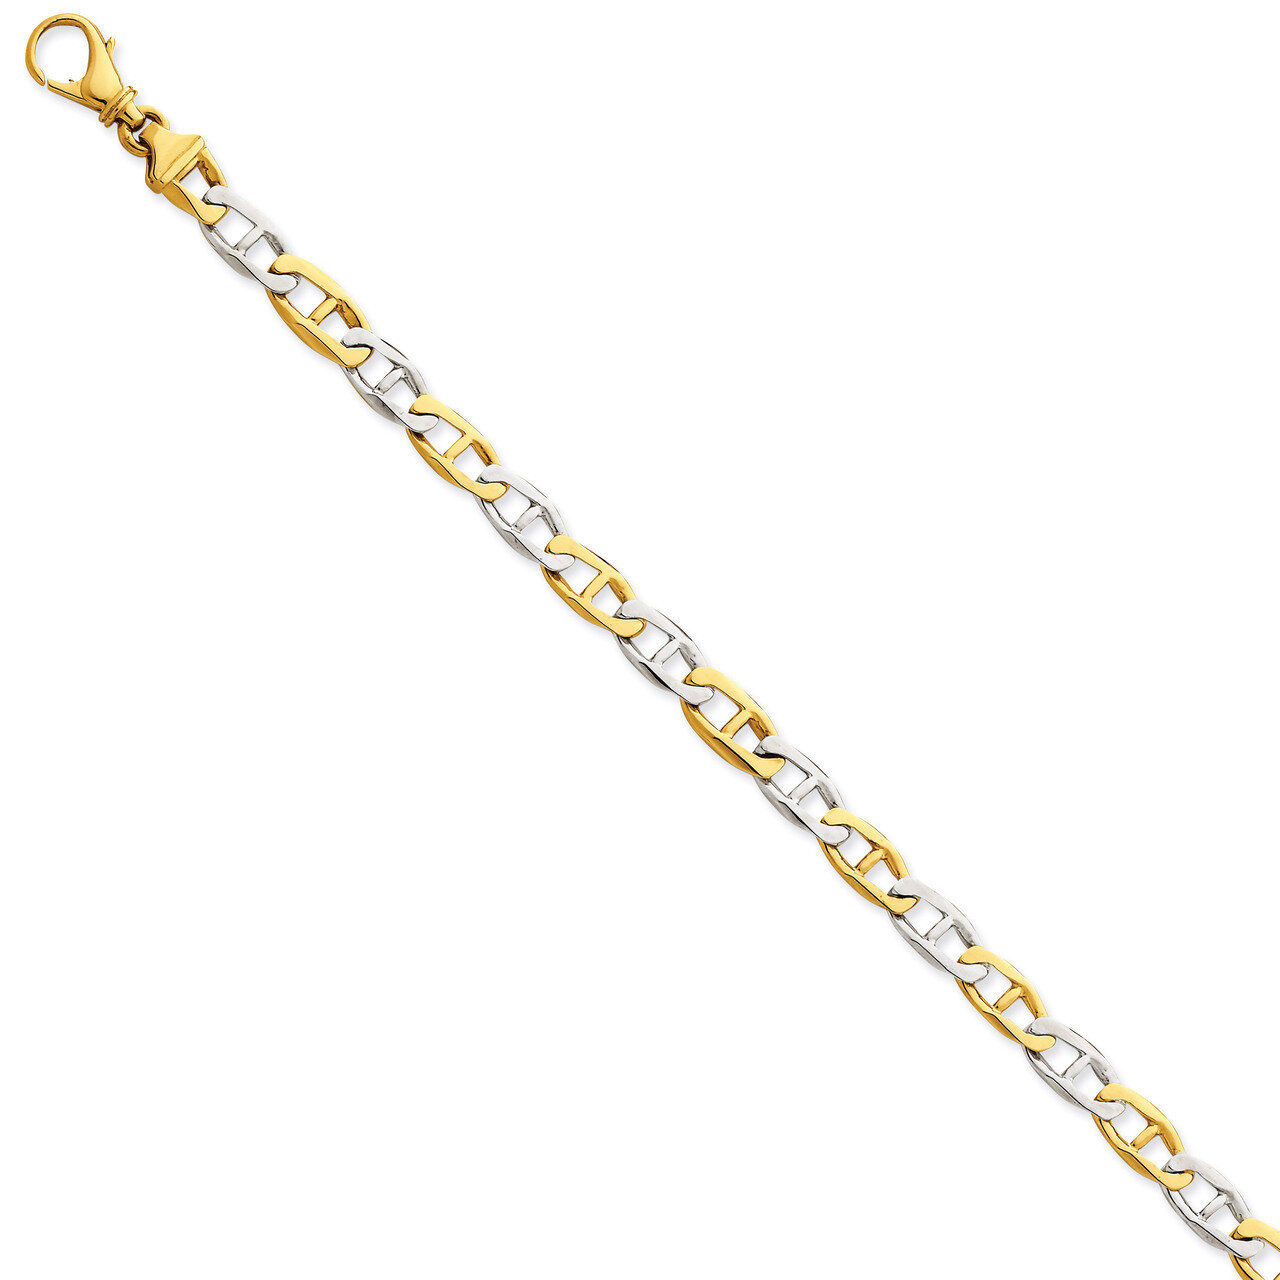 6.2mm Polished Fancy Link Chain 20 Inch 14k Two-Tone Gold LK504-20